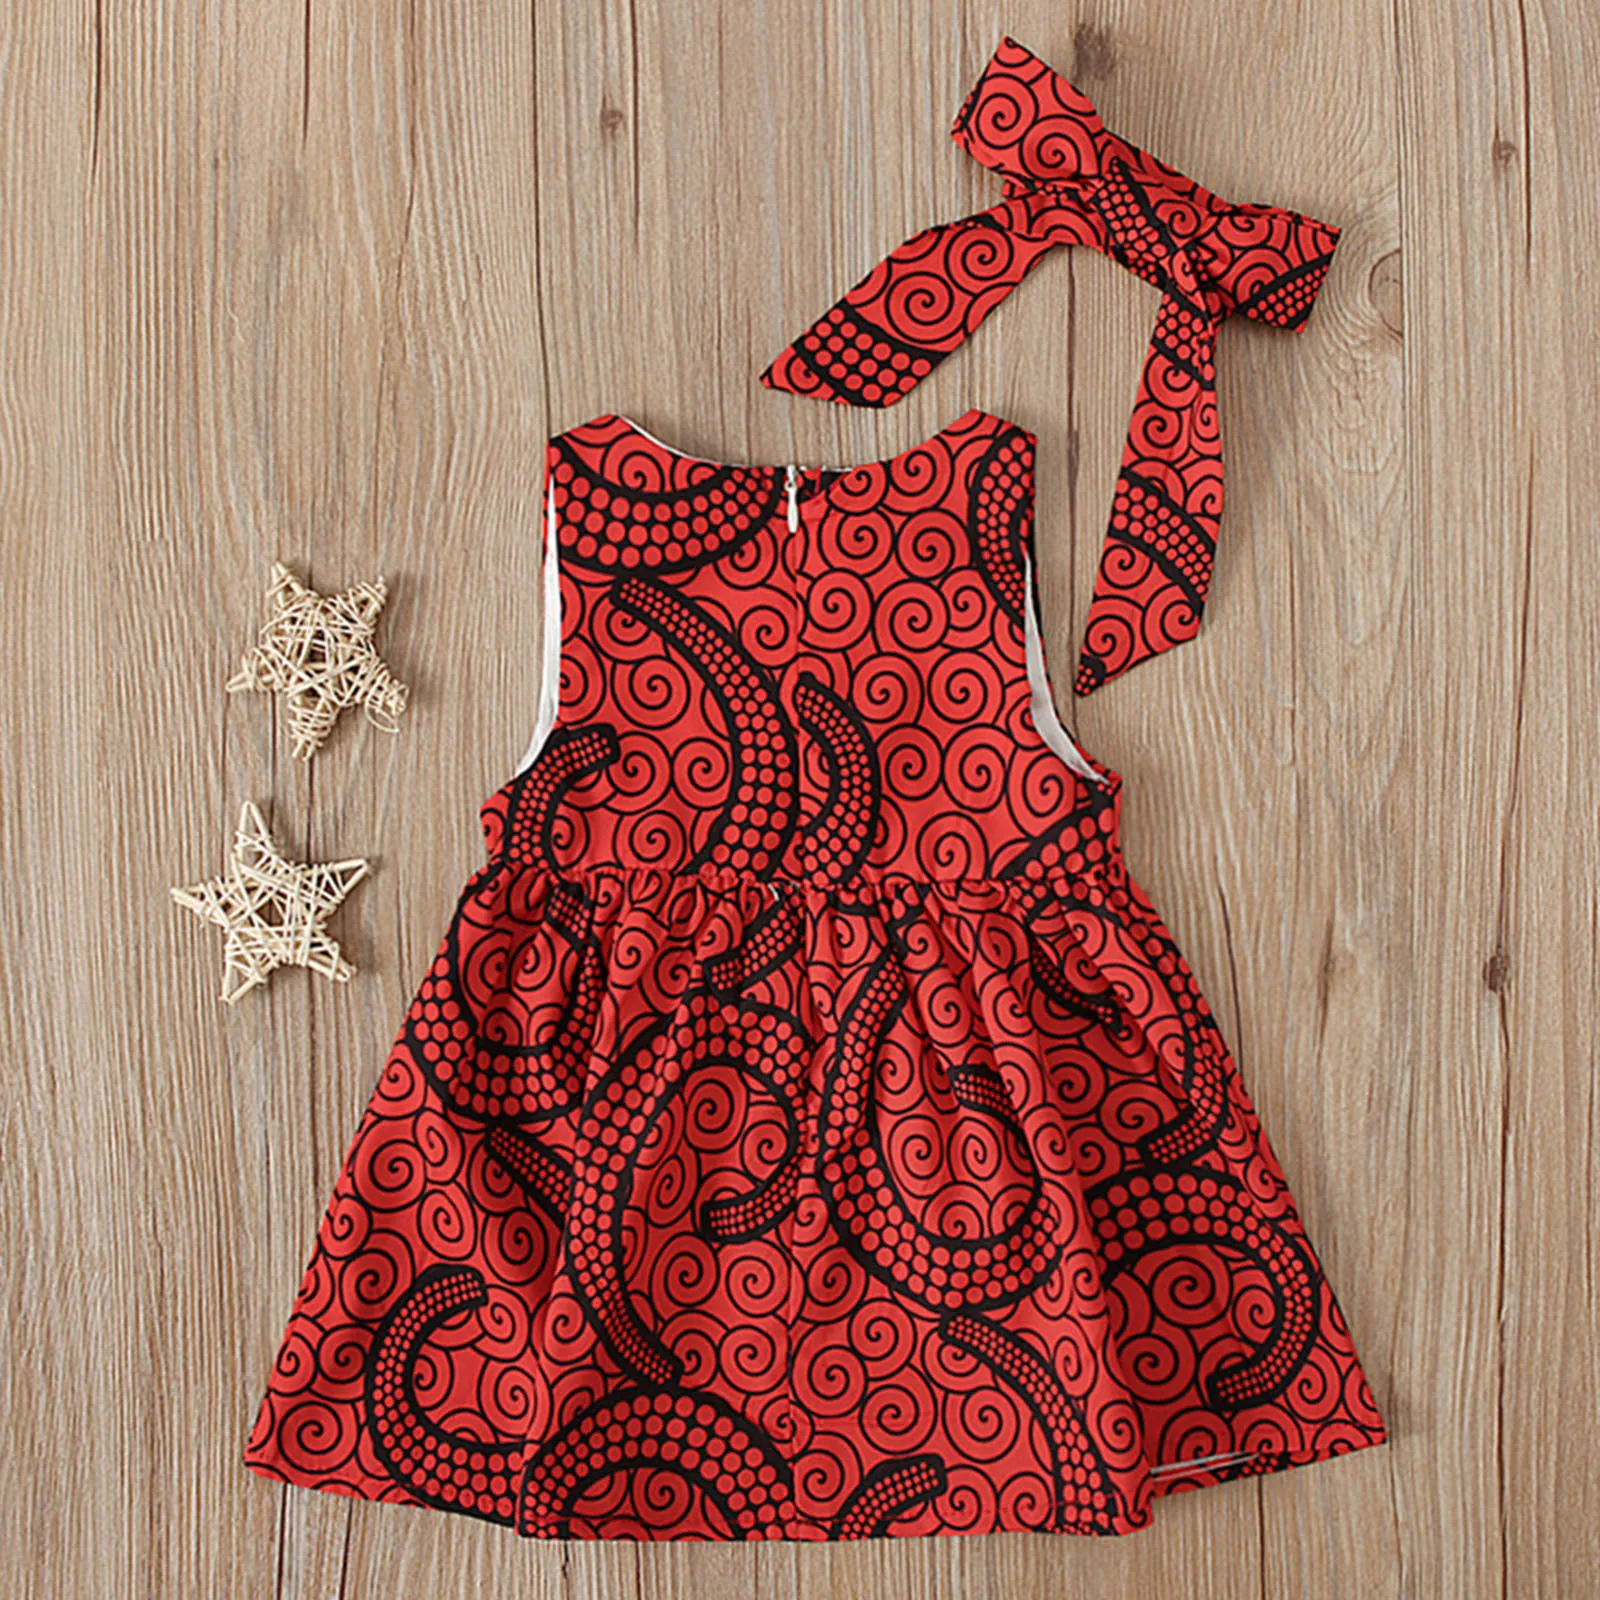 Dresses classic 6M-3Y Toddler Kids Baby Girls Dress African Dashiki Traditional Style Sleeveless Ankara Dresses With Headband Infant Outfits cute dresses